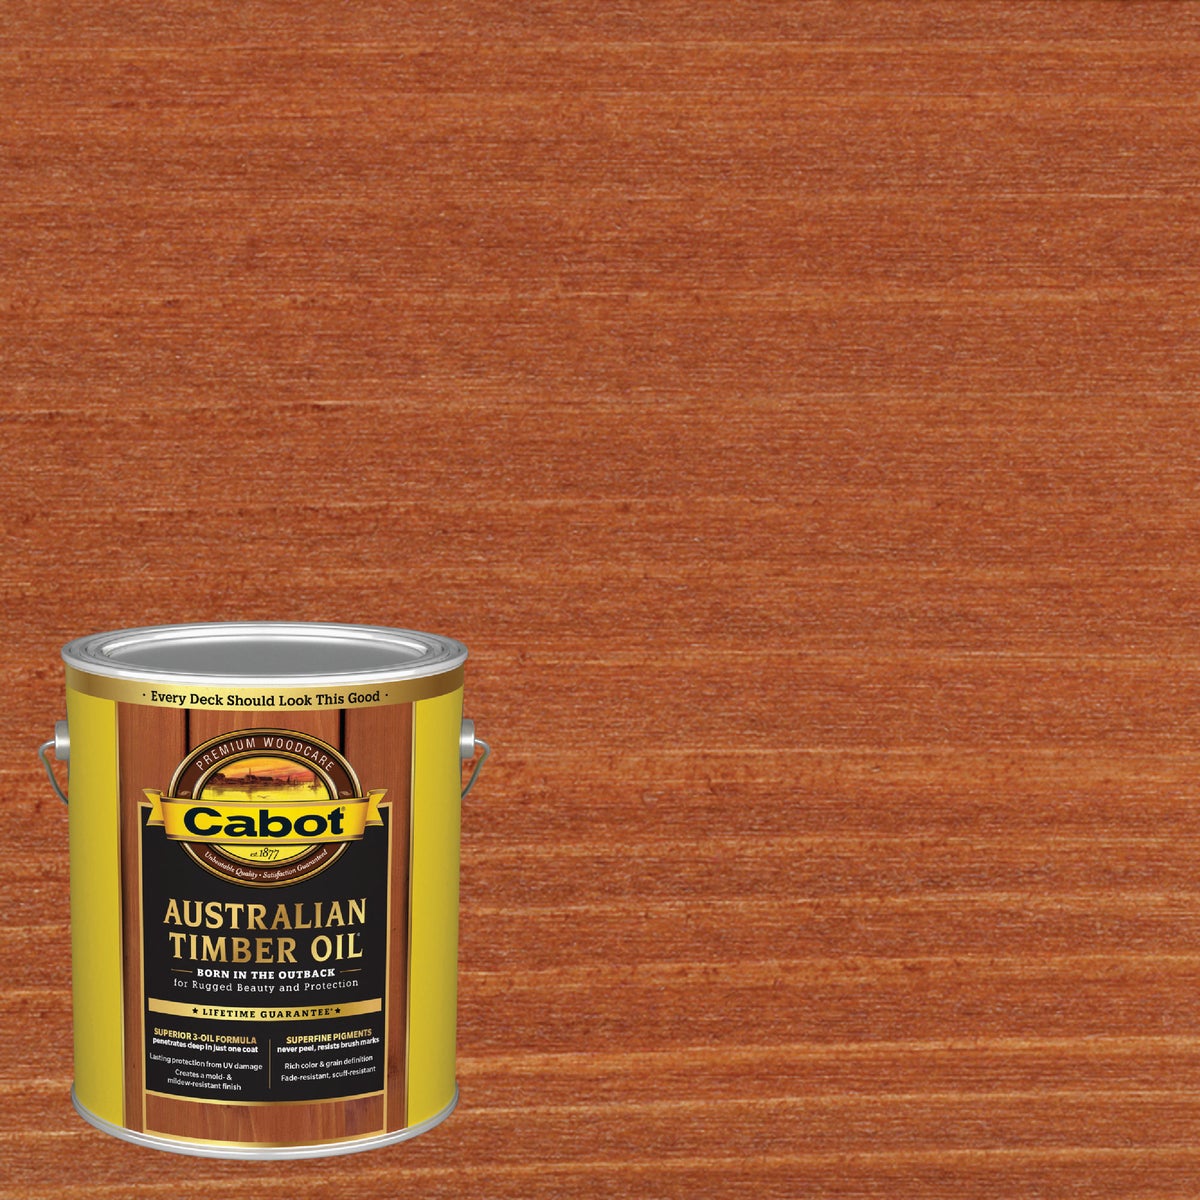 Cabot Australian Timber Oil Translucent Exterior Oil Finish, Mahogany Flame, 1 Gal.